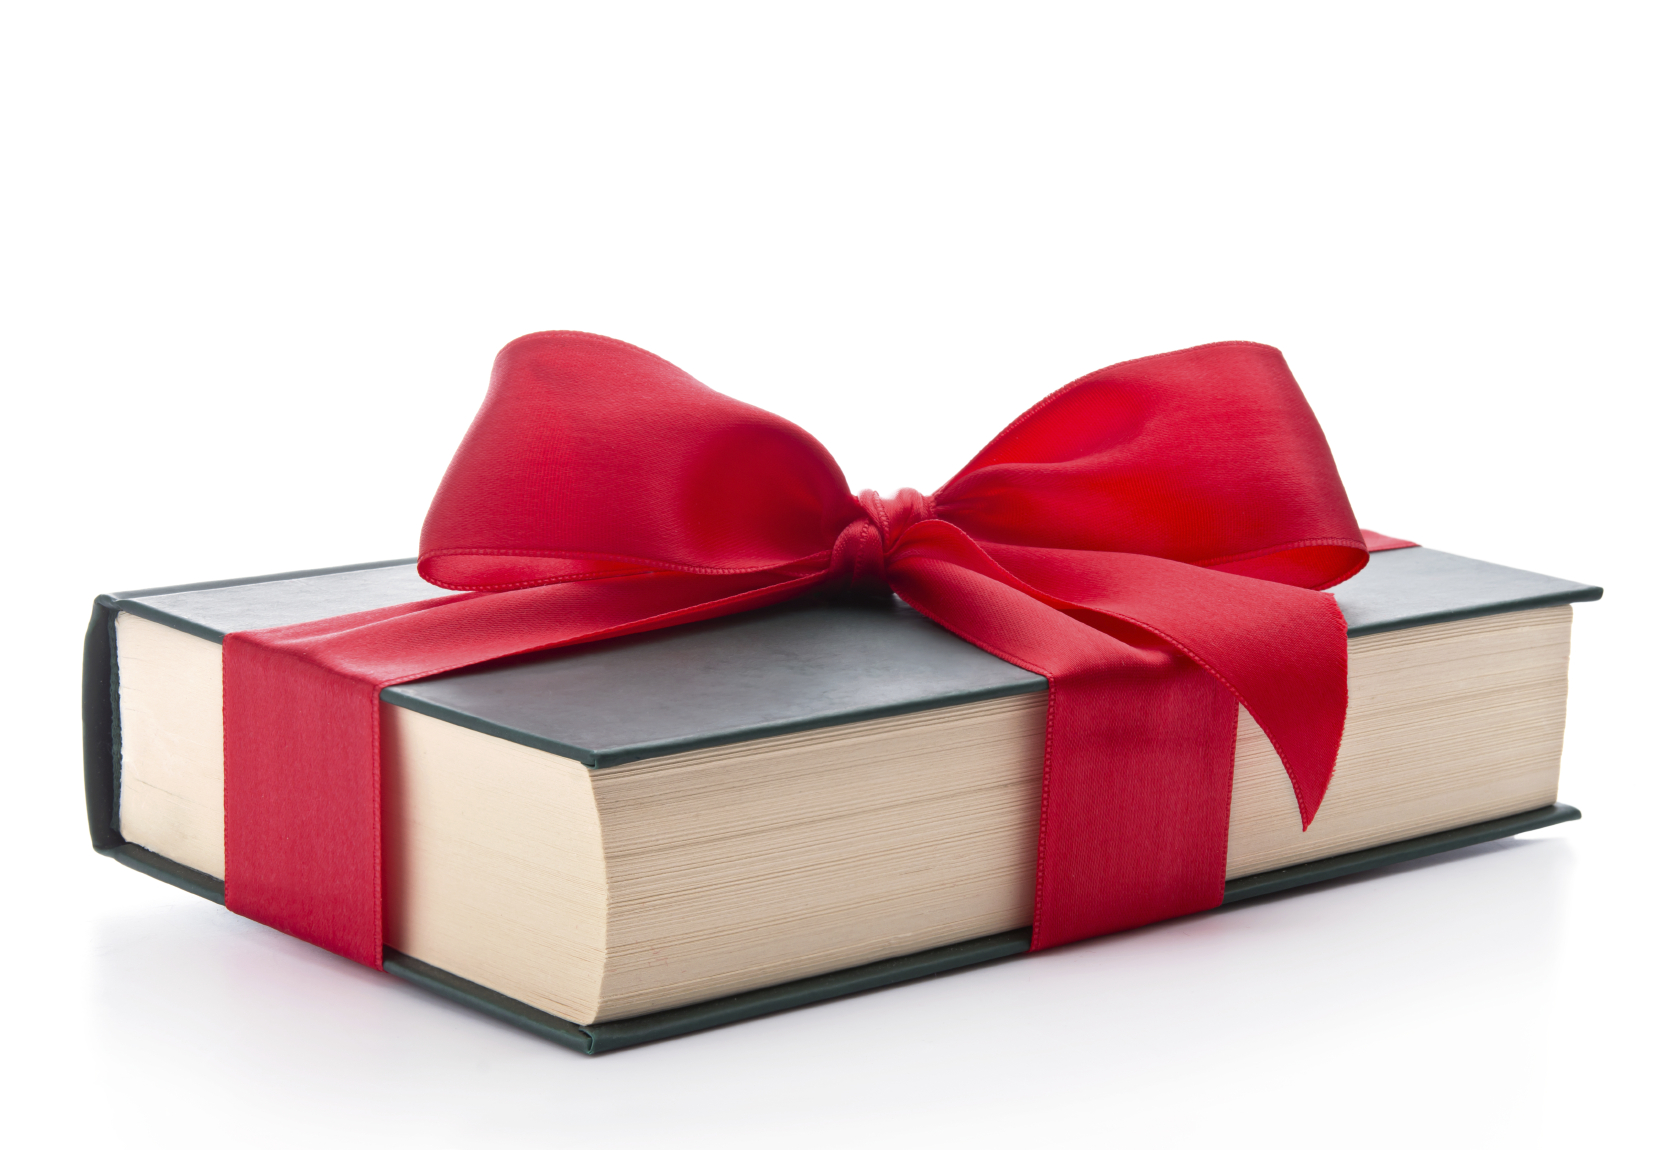 Book Gift PNG-PlusPNG.com-166